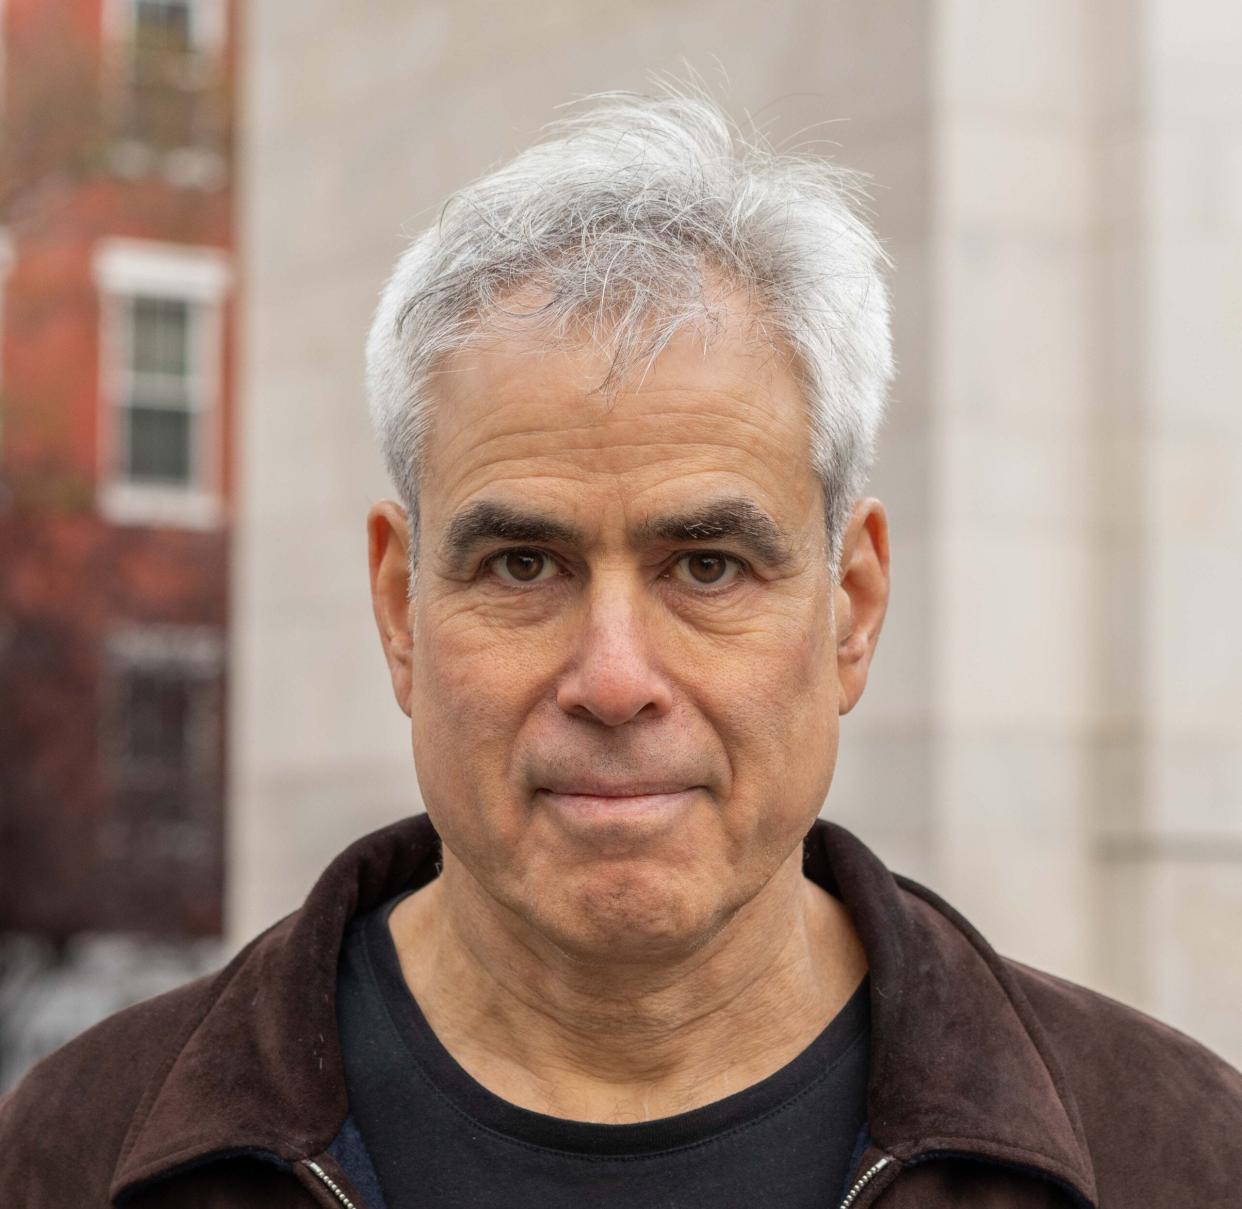 Social psychologist and New York Times best-selling author Jonathan Haidt